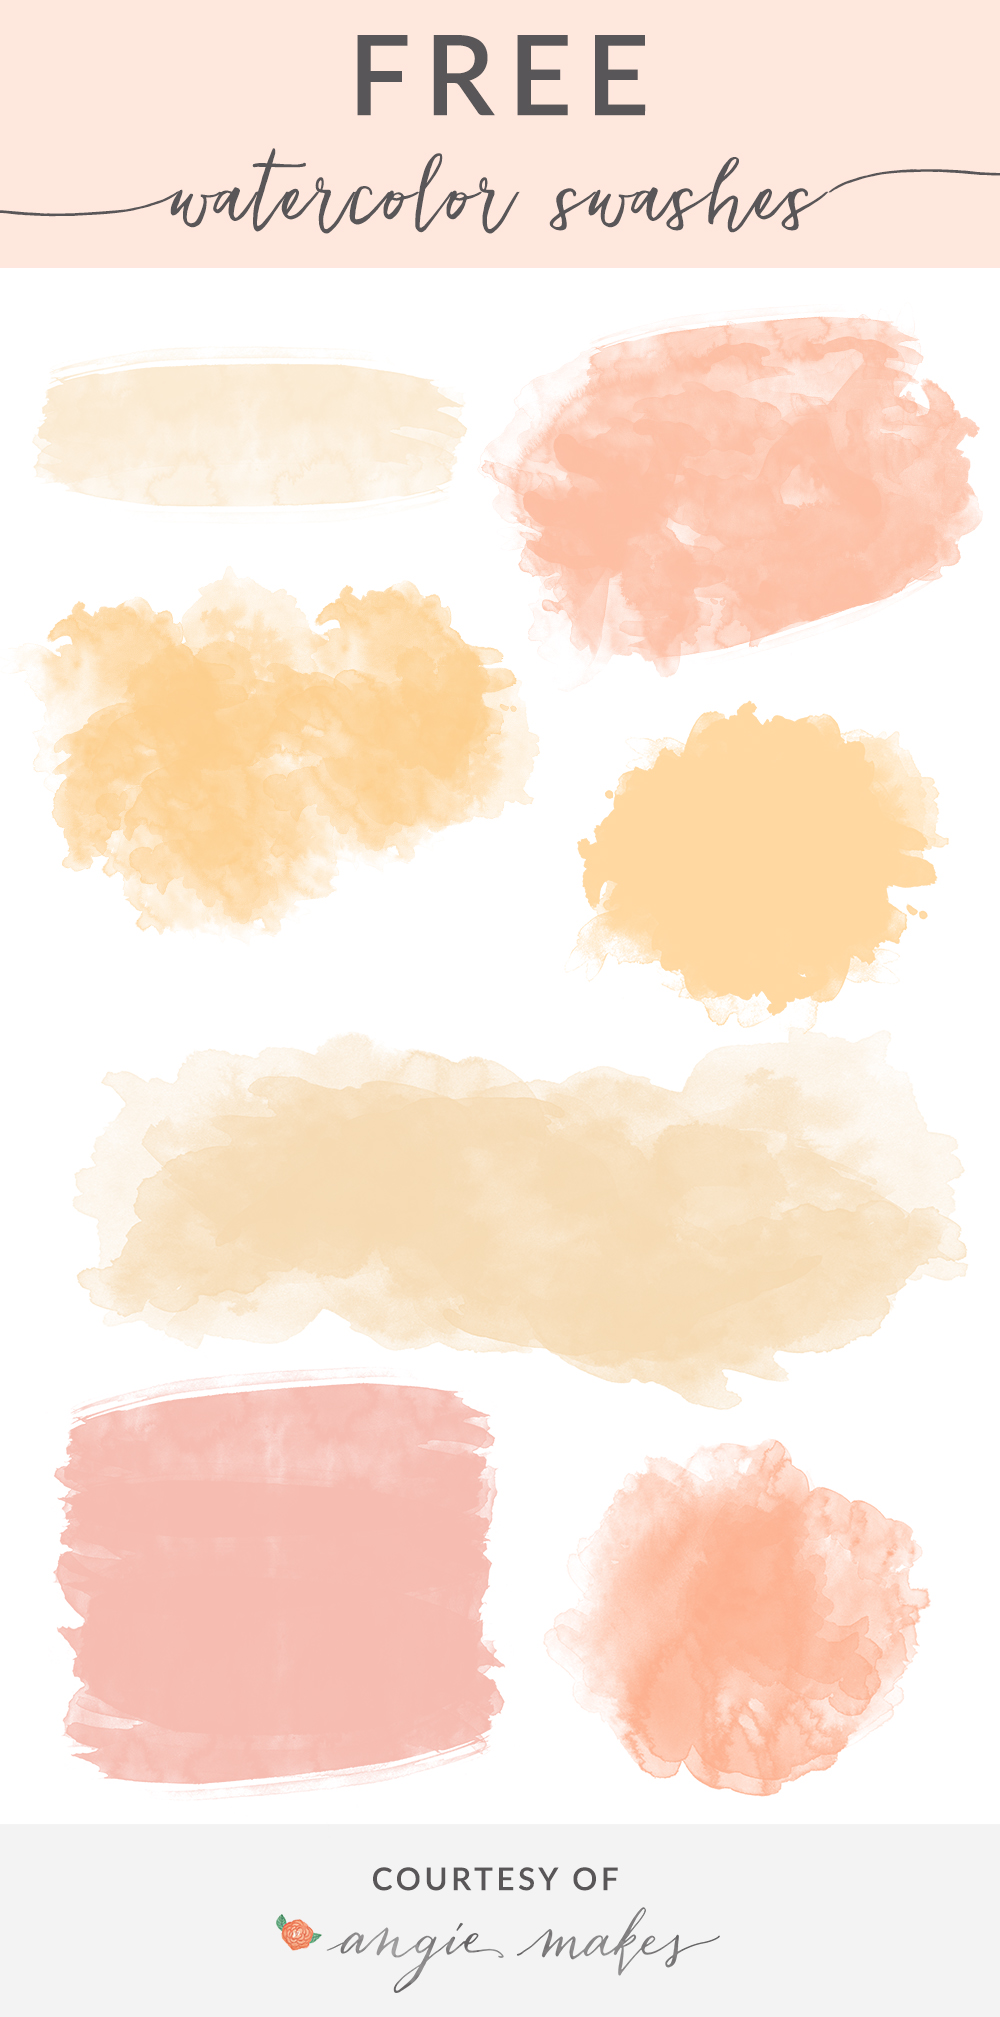 Free Watercolor Swash Backgrounds | angiemakes.com